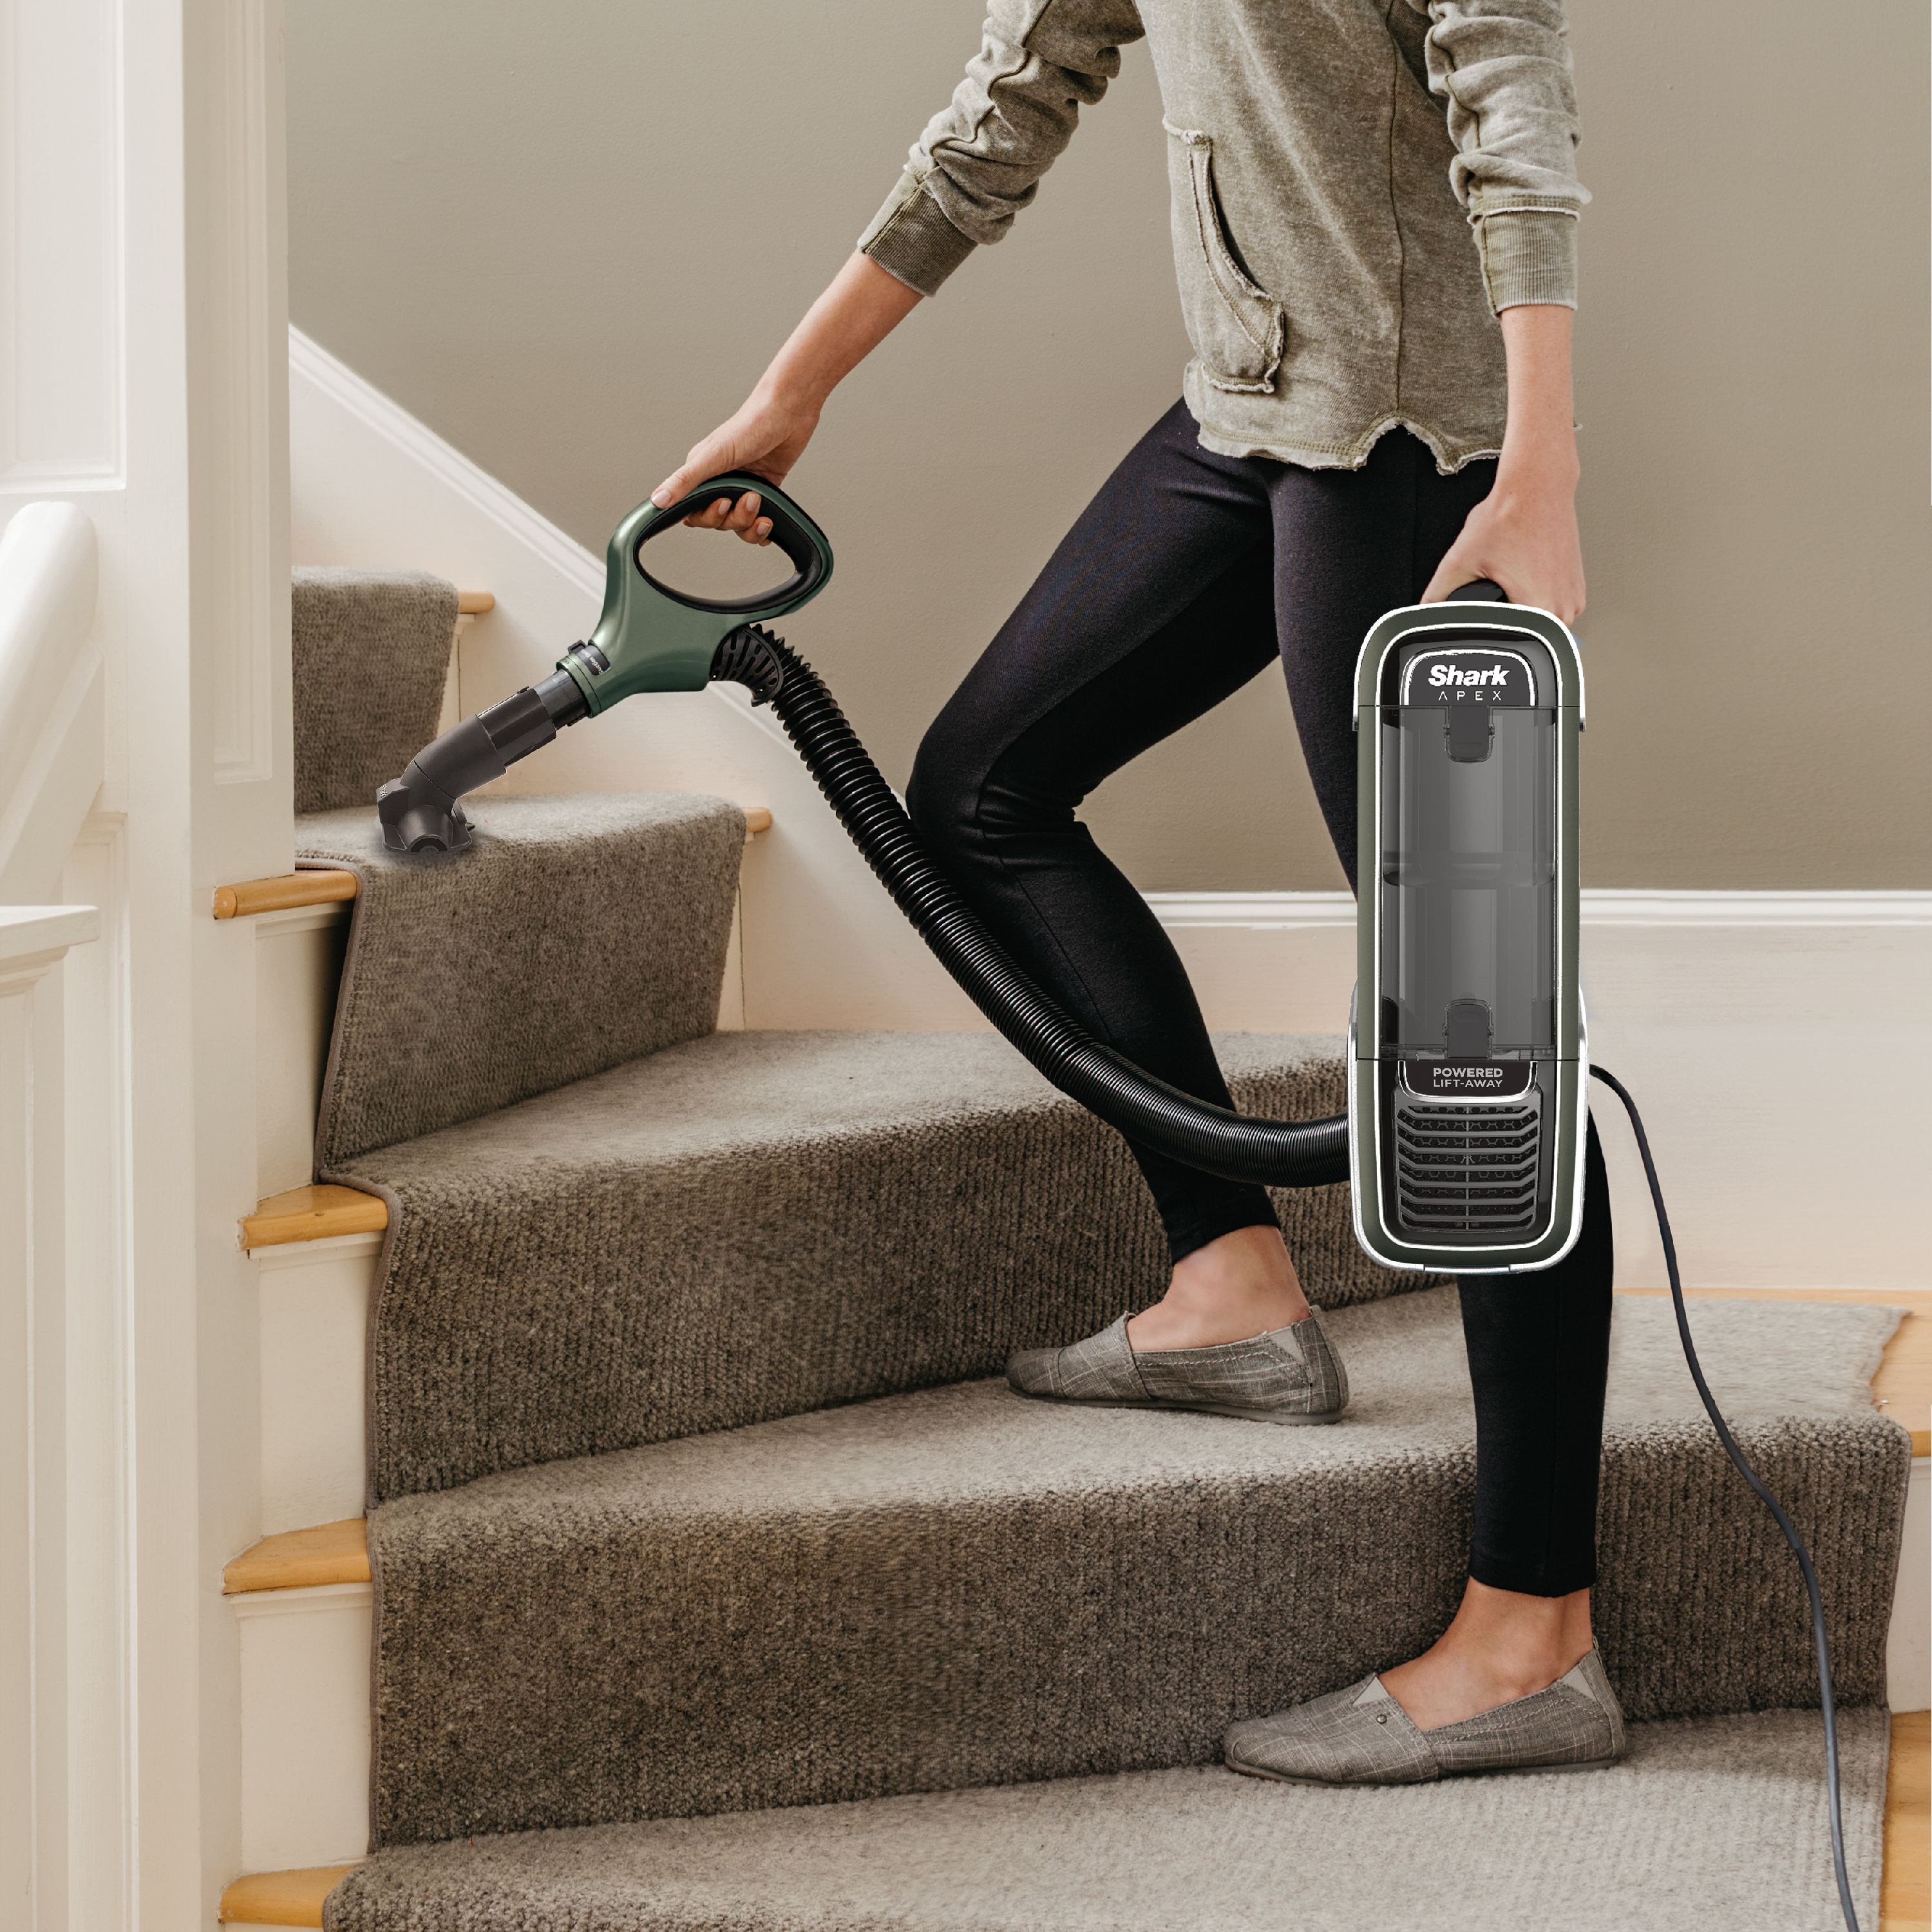 Shark APEX Duo Clean with Self-Cleaning Brush Roll Powered Lift-Away Upright Vacuum, AZ1000 - image 5 of 12